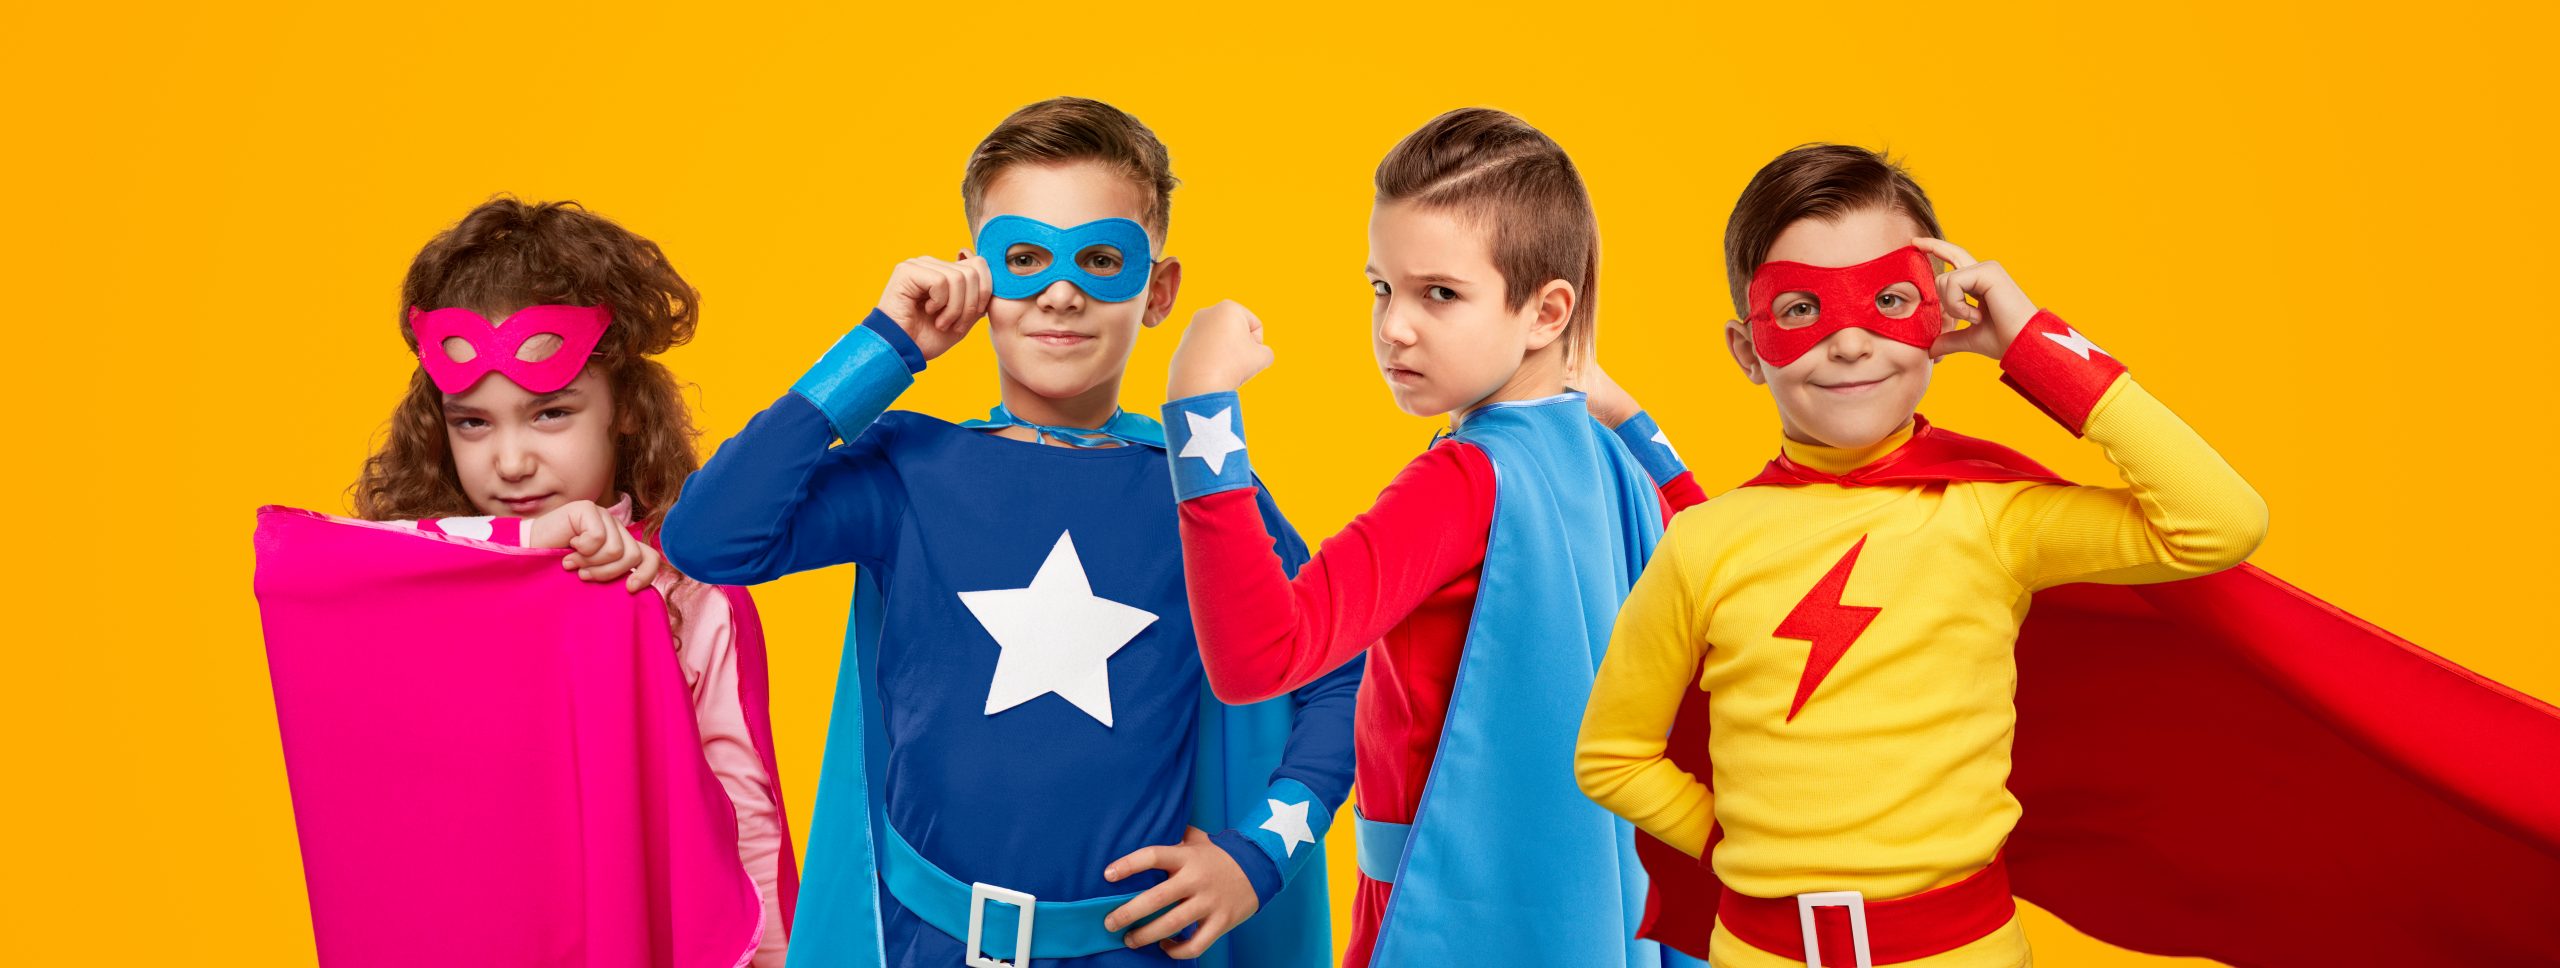 Company of brave kids in colorful superhero capes and masks lookin at camera on yellow background in studio